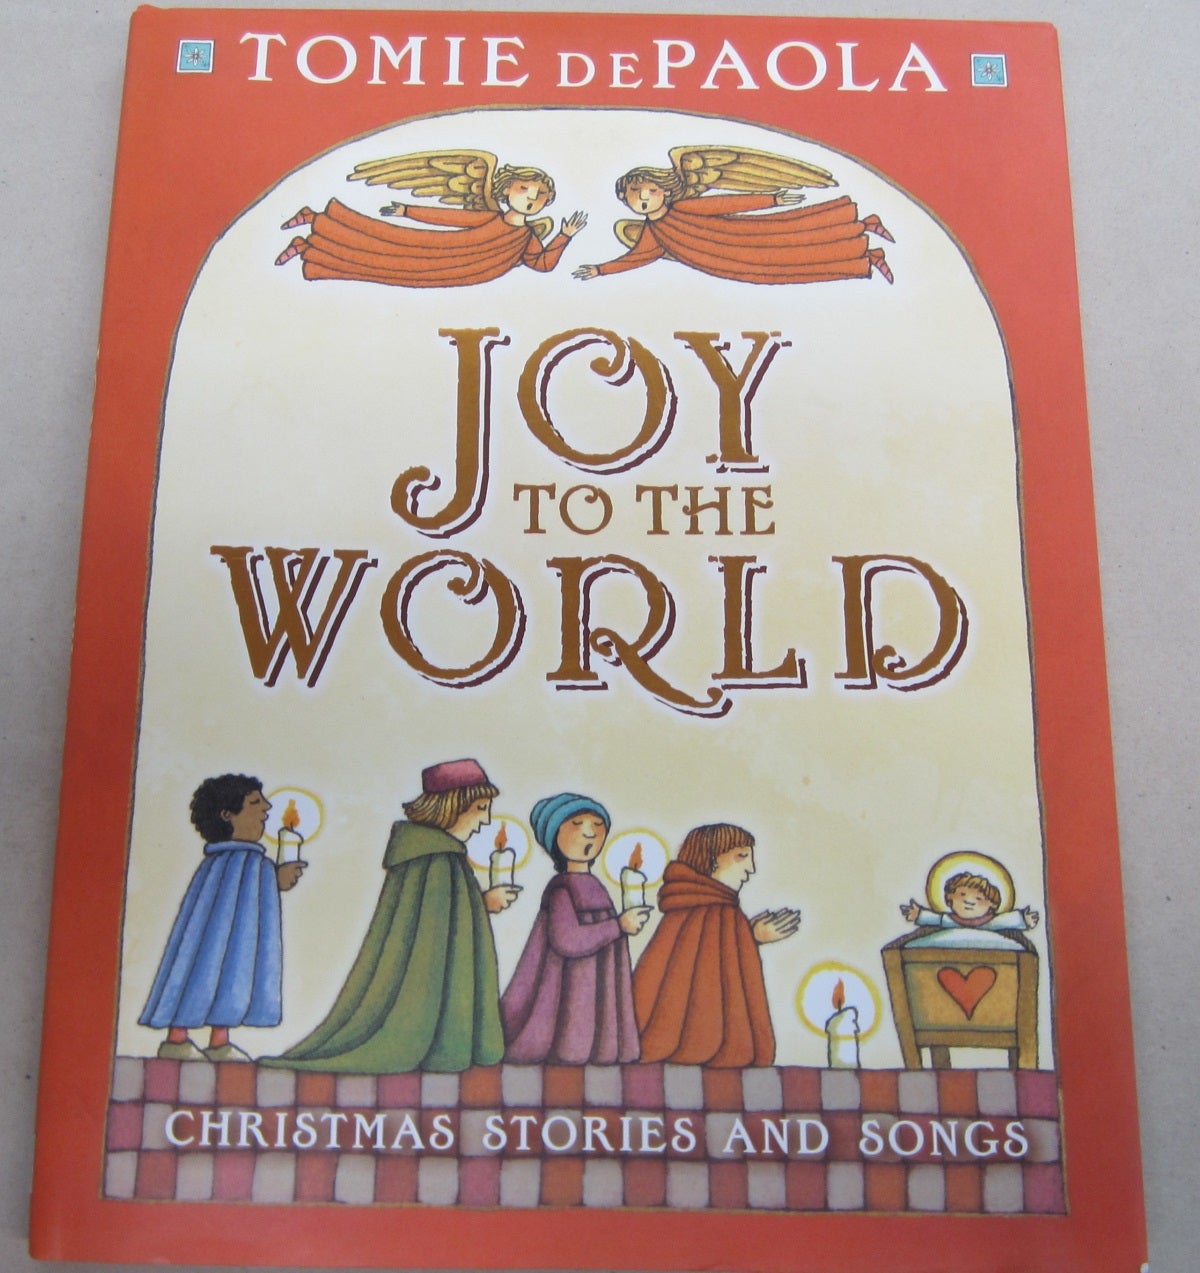 Joy　edition　Stories　Christmas　to　Songs　the　First　World;　and　Tomie　dePaola